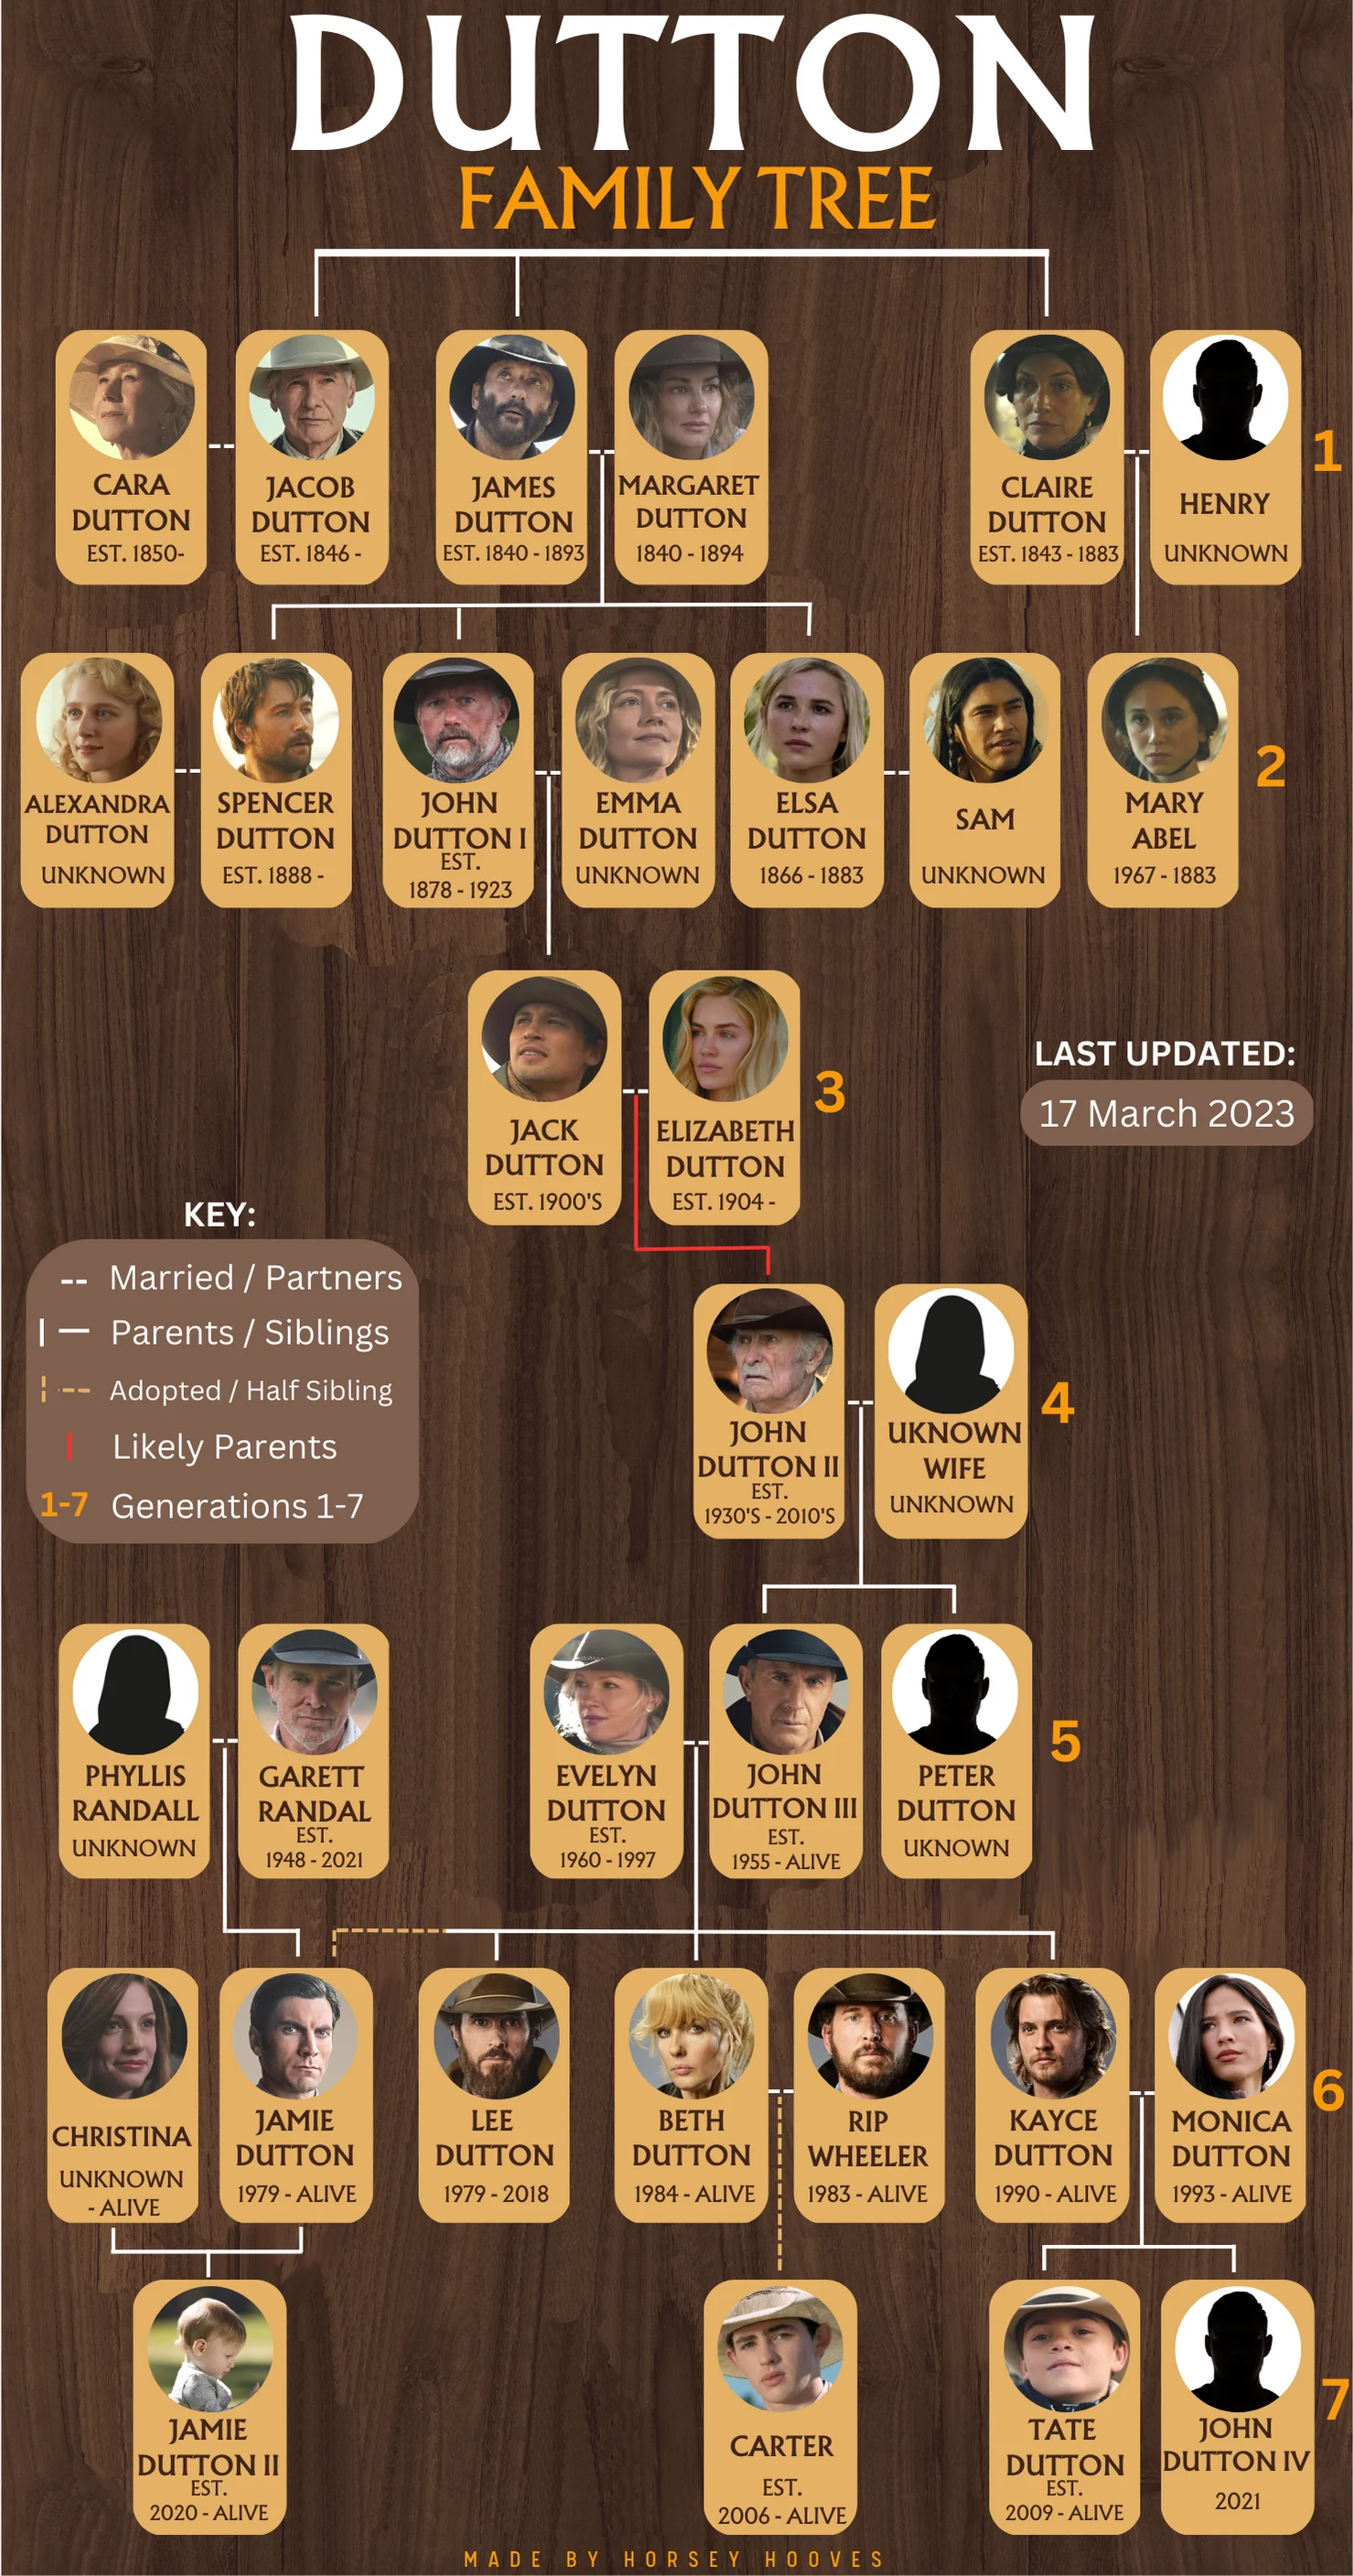 Dutton Family Tree that includes every Dutton from Yellowstone, 1923, and 1883